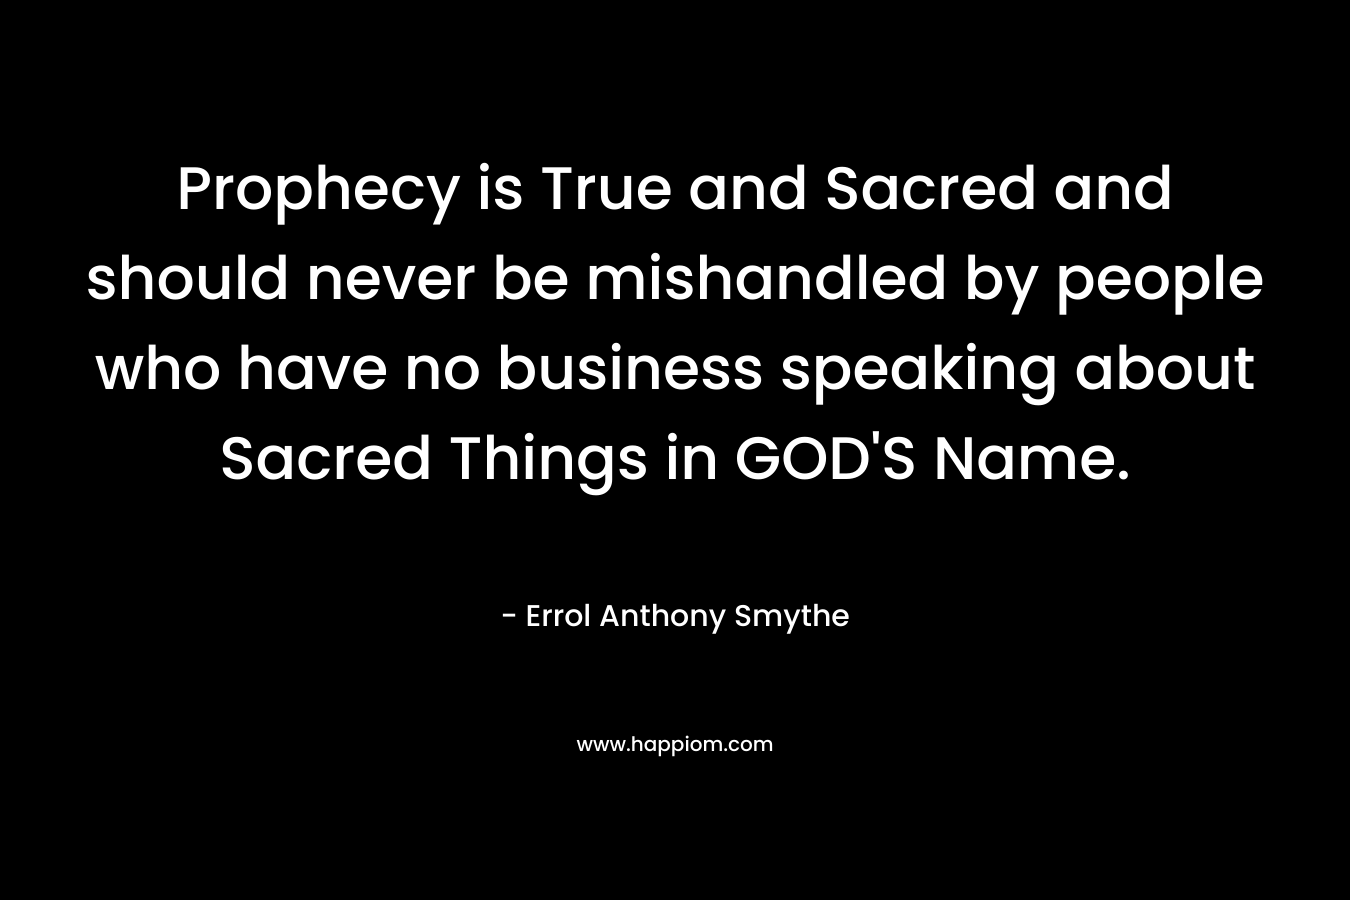 Prophecy is True and Sacred and should never be mishandled by people who have no business speaking about Sacred Things in GOD’S Name. – Errol Anthony Smythe